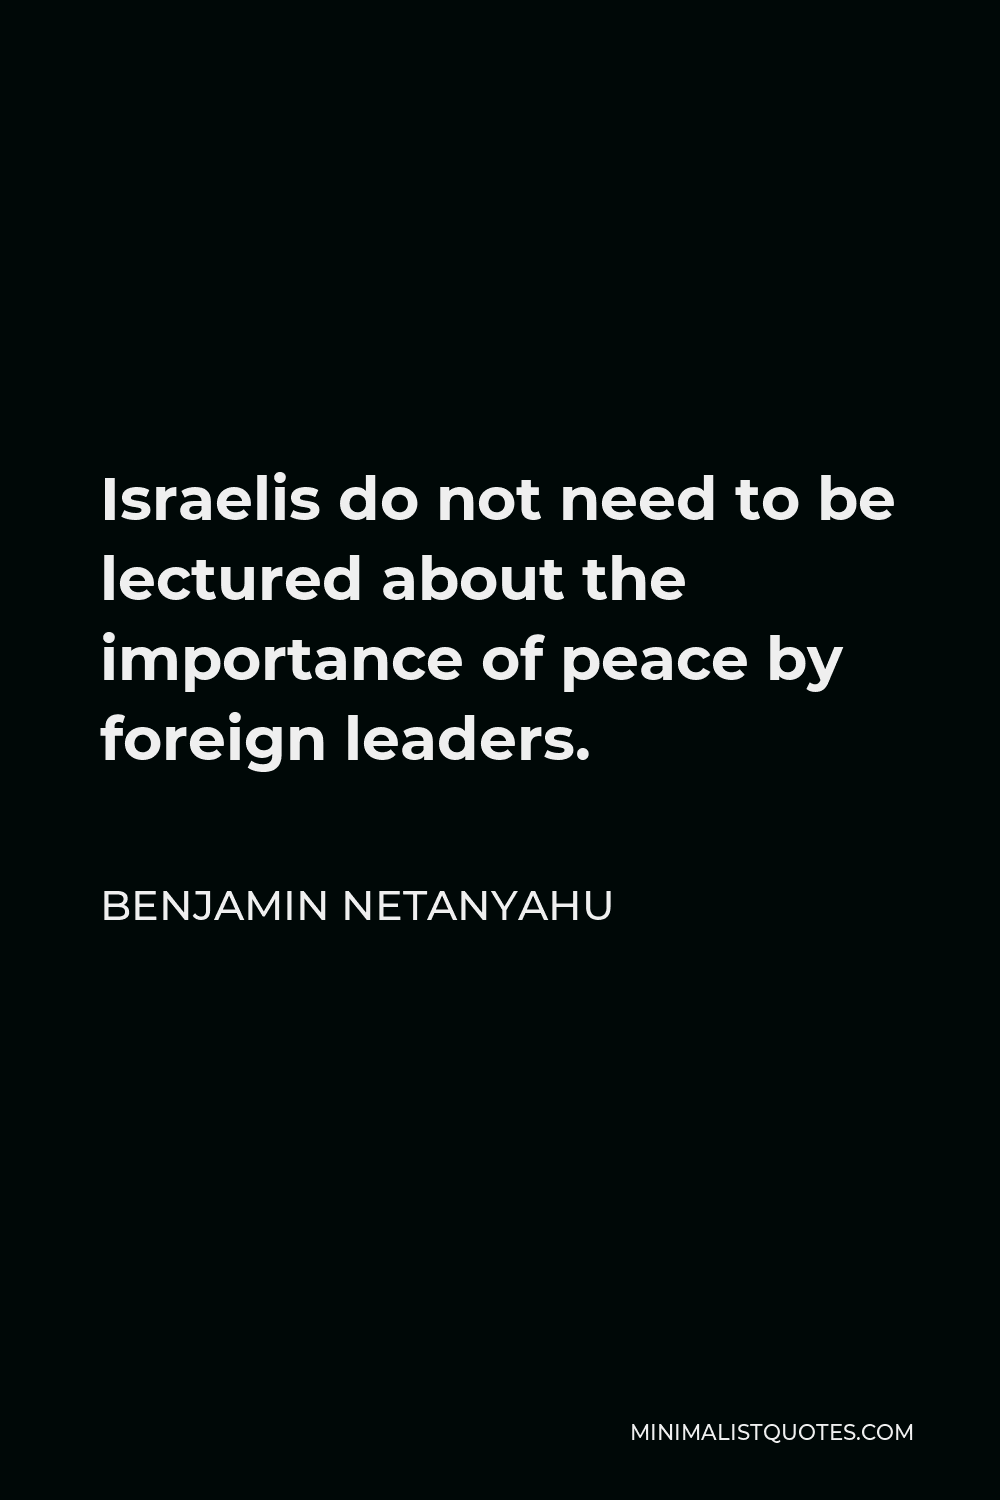 Benjamin Netanyahu Quote - Israelis do not need to be lectured about the importance of peace by foreign leaders.